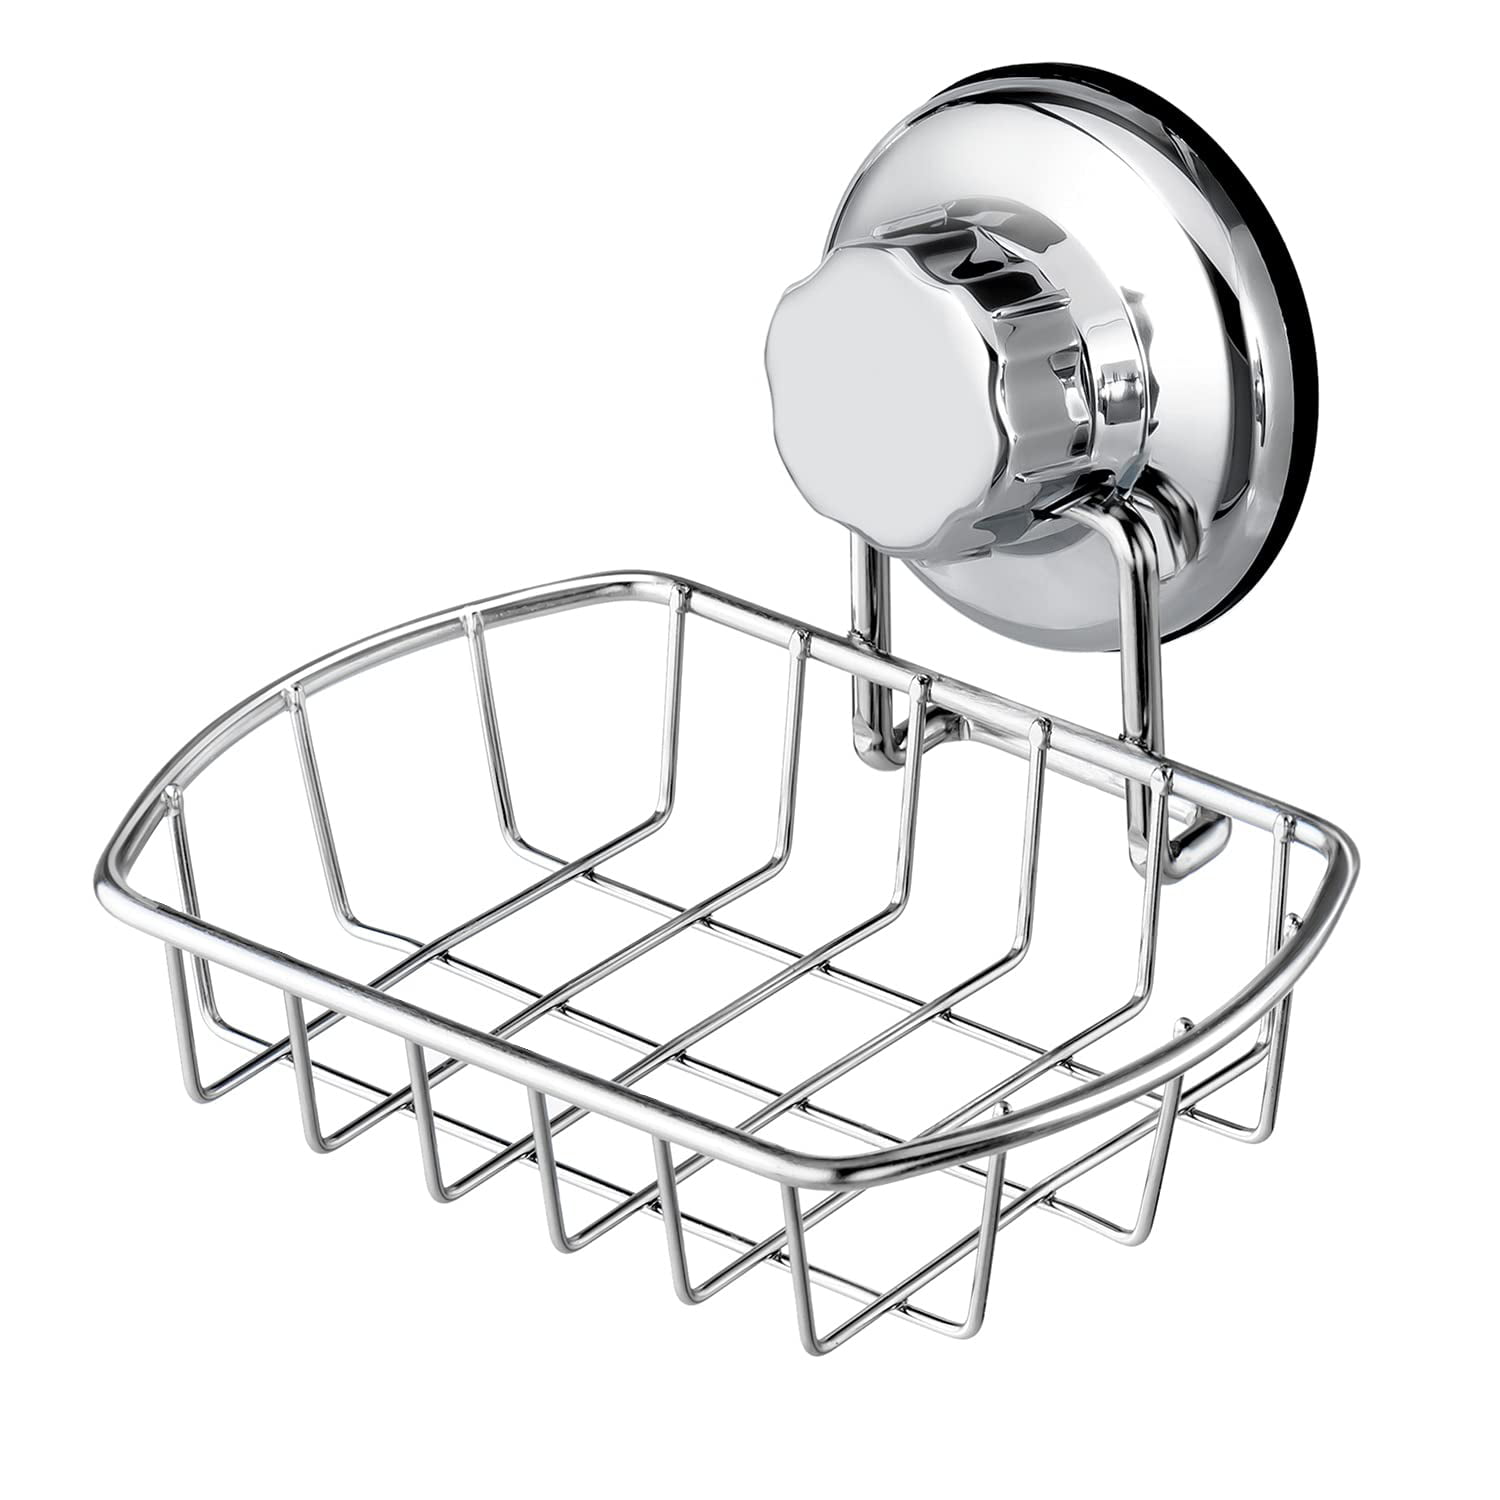 Rebrilliant Soap Dish for Shower with Suction Cup, Shower Soap Holder,  Stainless Steel Bar Soap Holder, Soap Holder for Shower Wall, Soap Dishes  for Bathroom, Soap Bar Holder Adhesive No Drilling